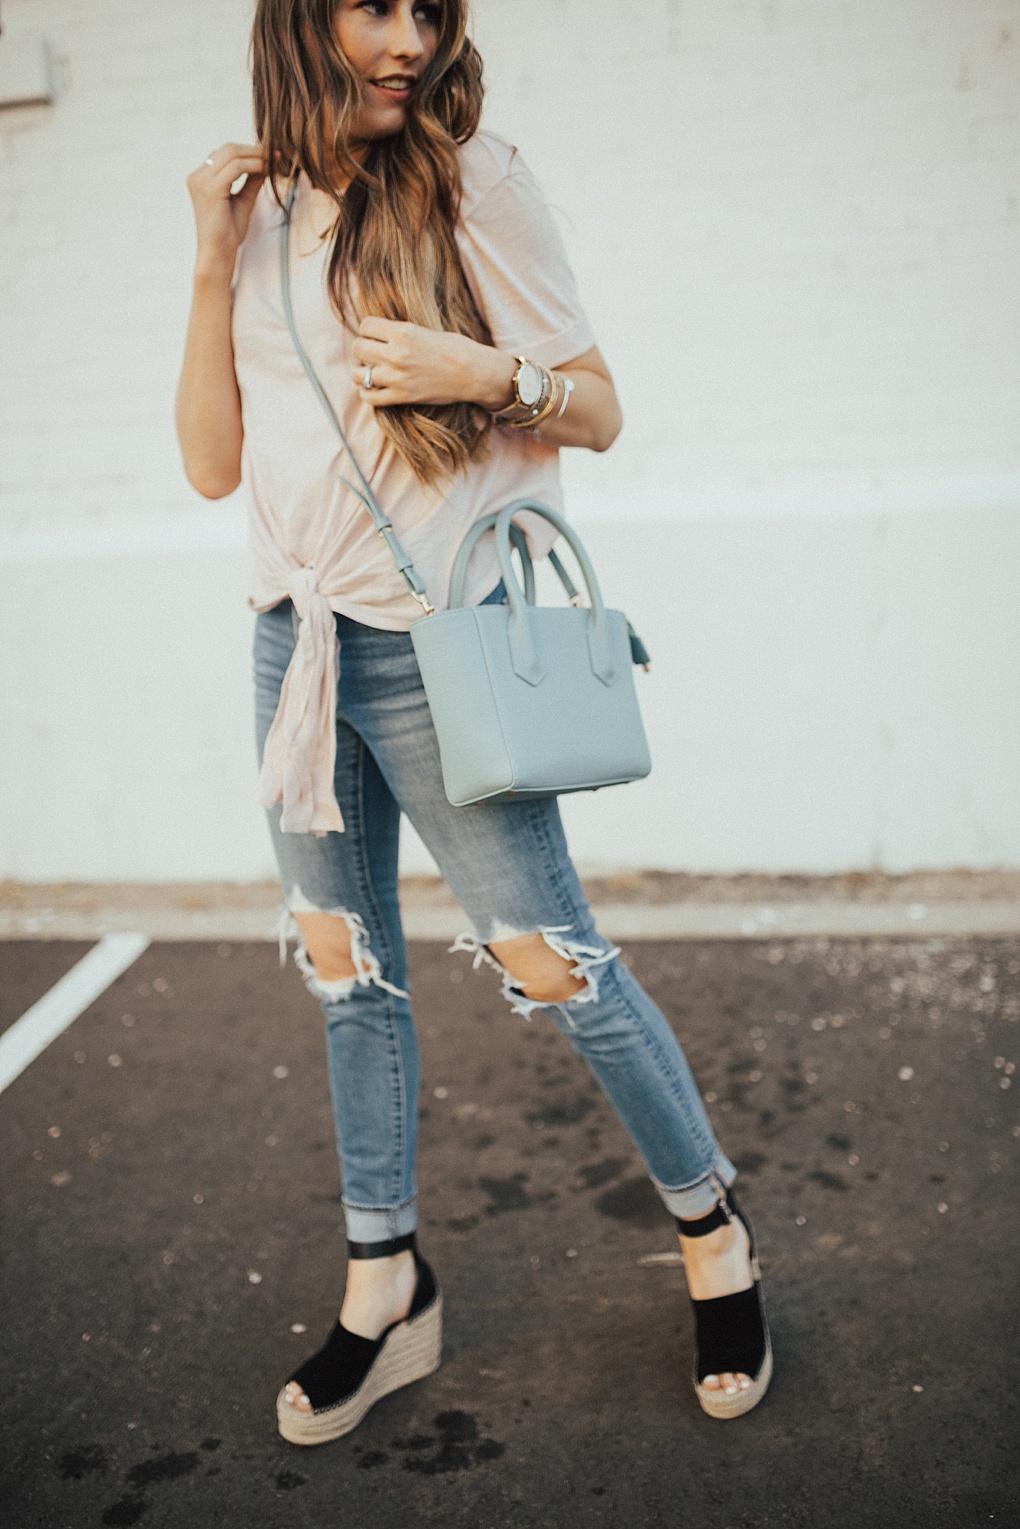 The Must Have Tie Tee Shirt To Transition To Fall by Utah fashion blogger Dani Marie.